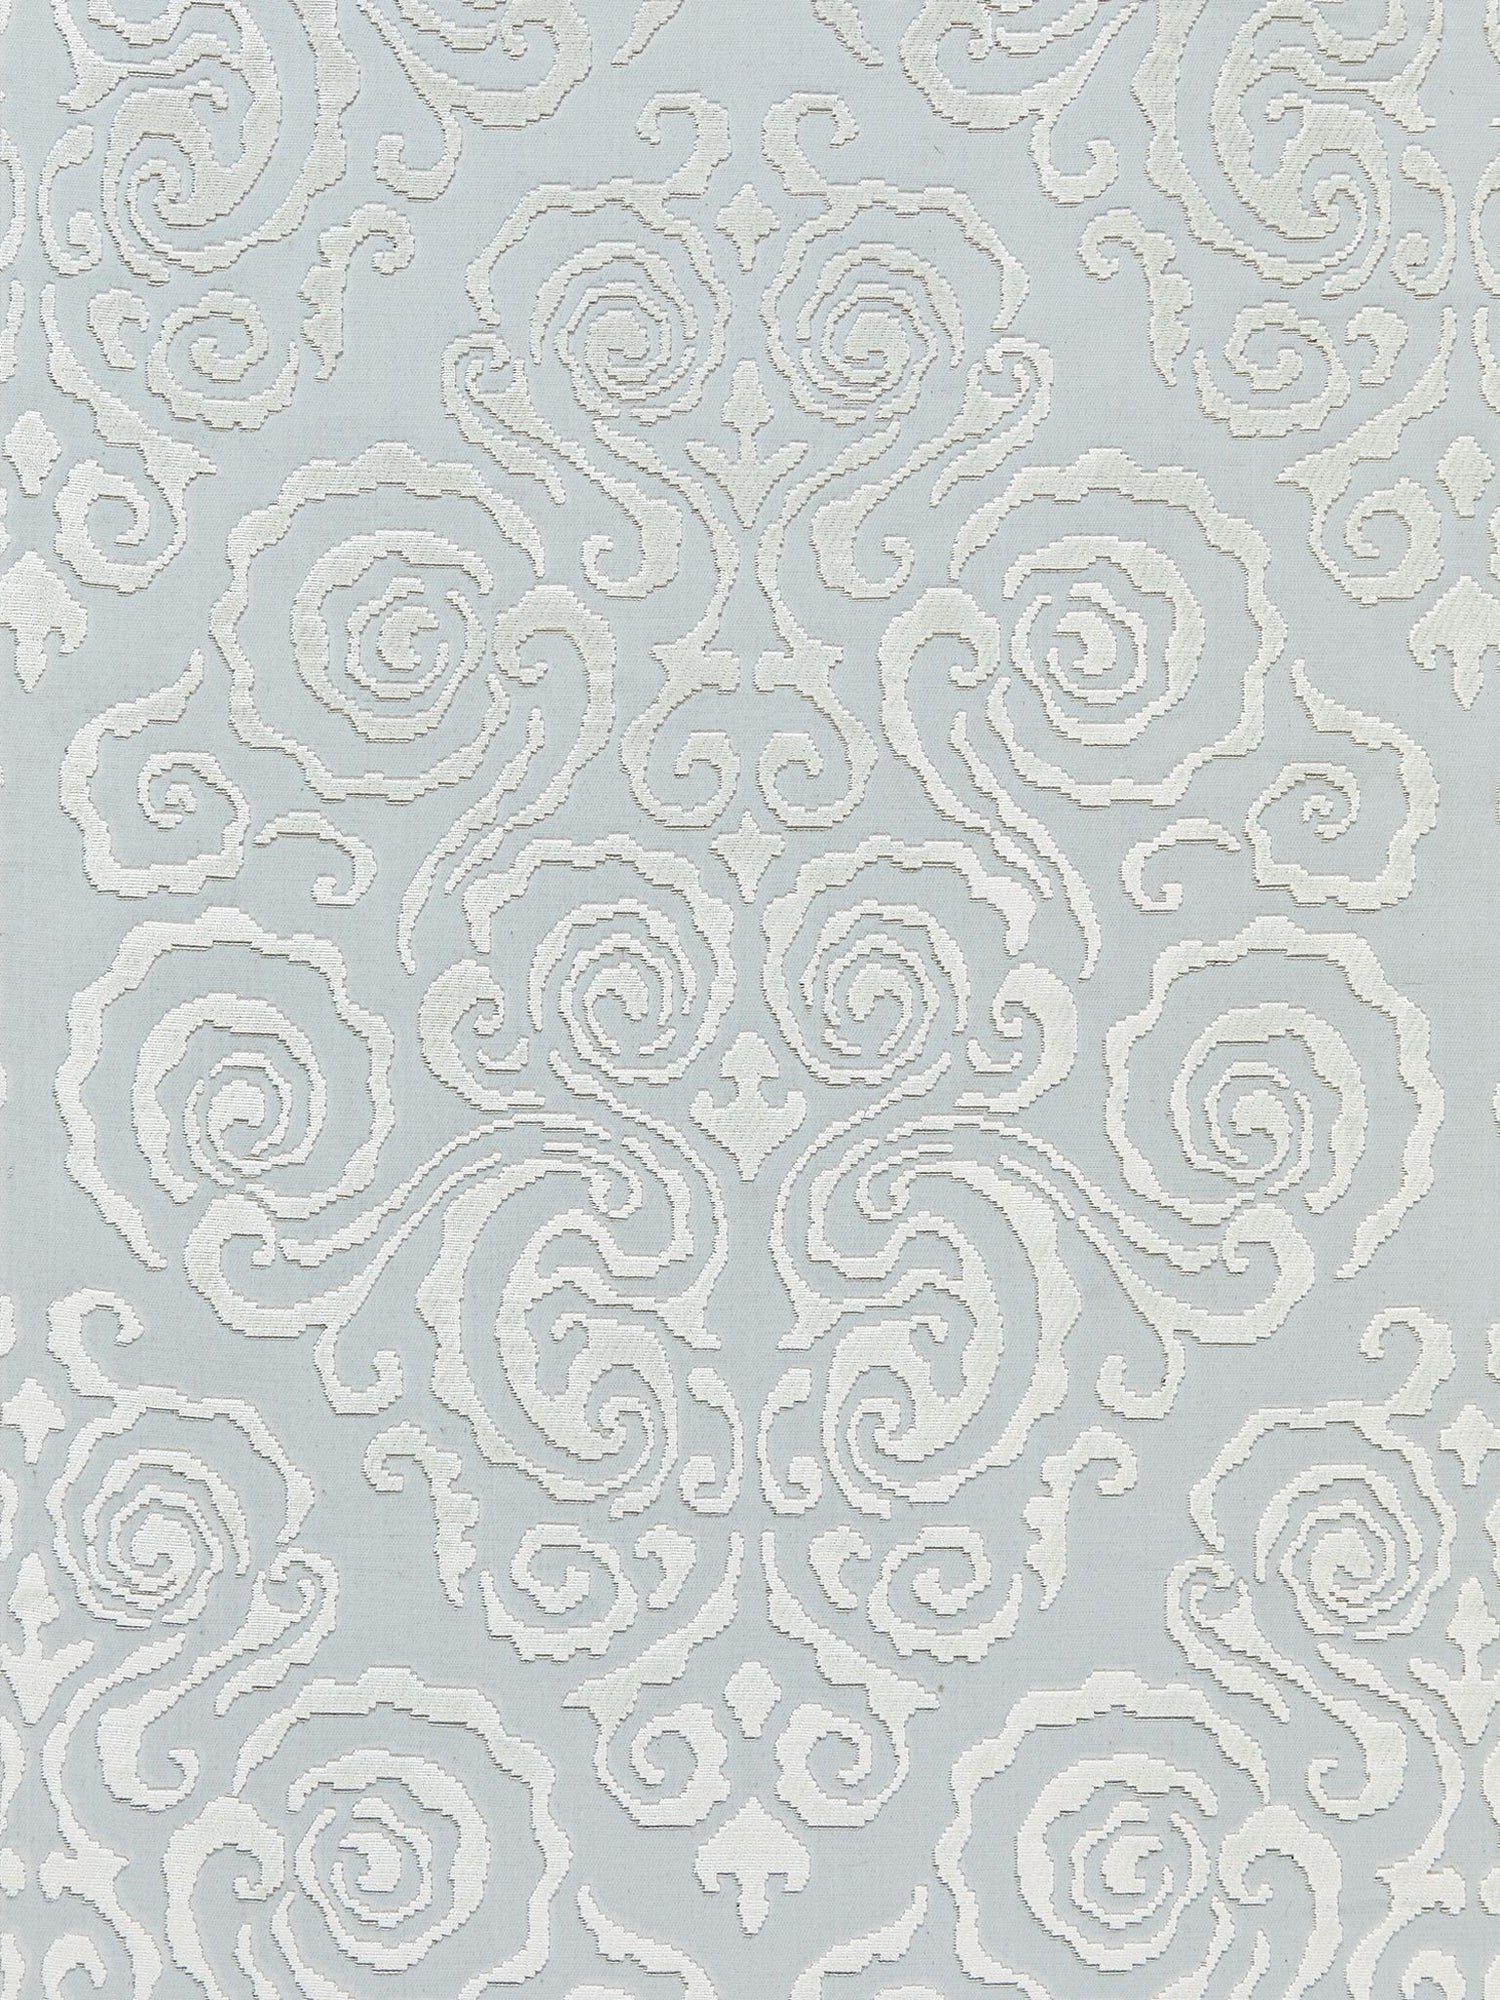 Cirrus Velvet Damask fabric in mist color - pattern number SC 000127219 - by Scalamandre in the Scalamandre Fabrics Book 1 collection